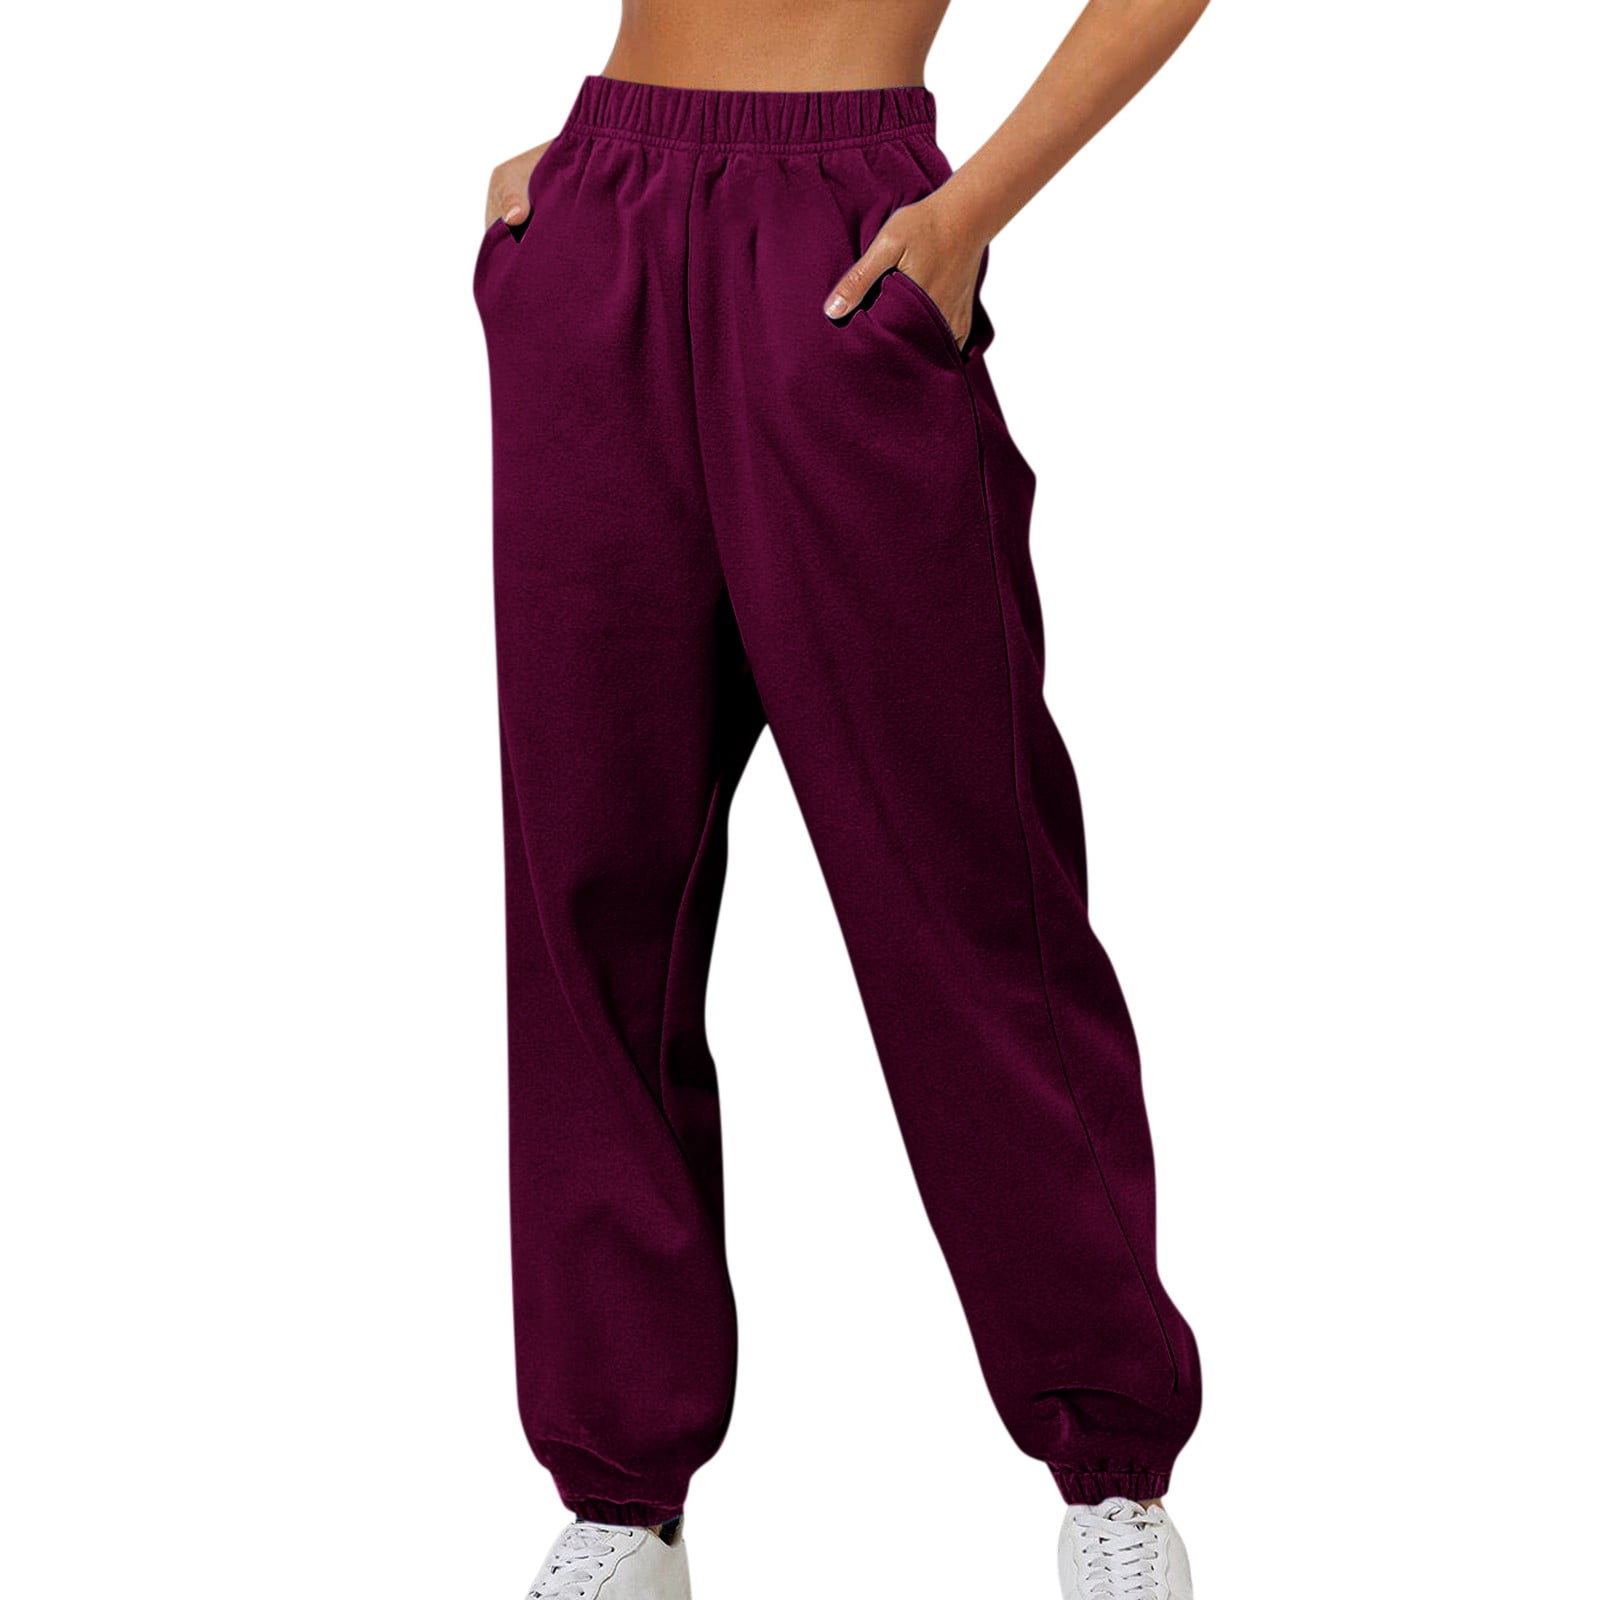 DENGDENG Comfy Sweatpants Women Solid Color High Waisted with Pockets ...